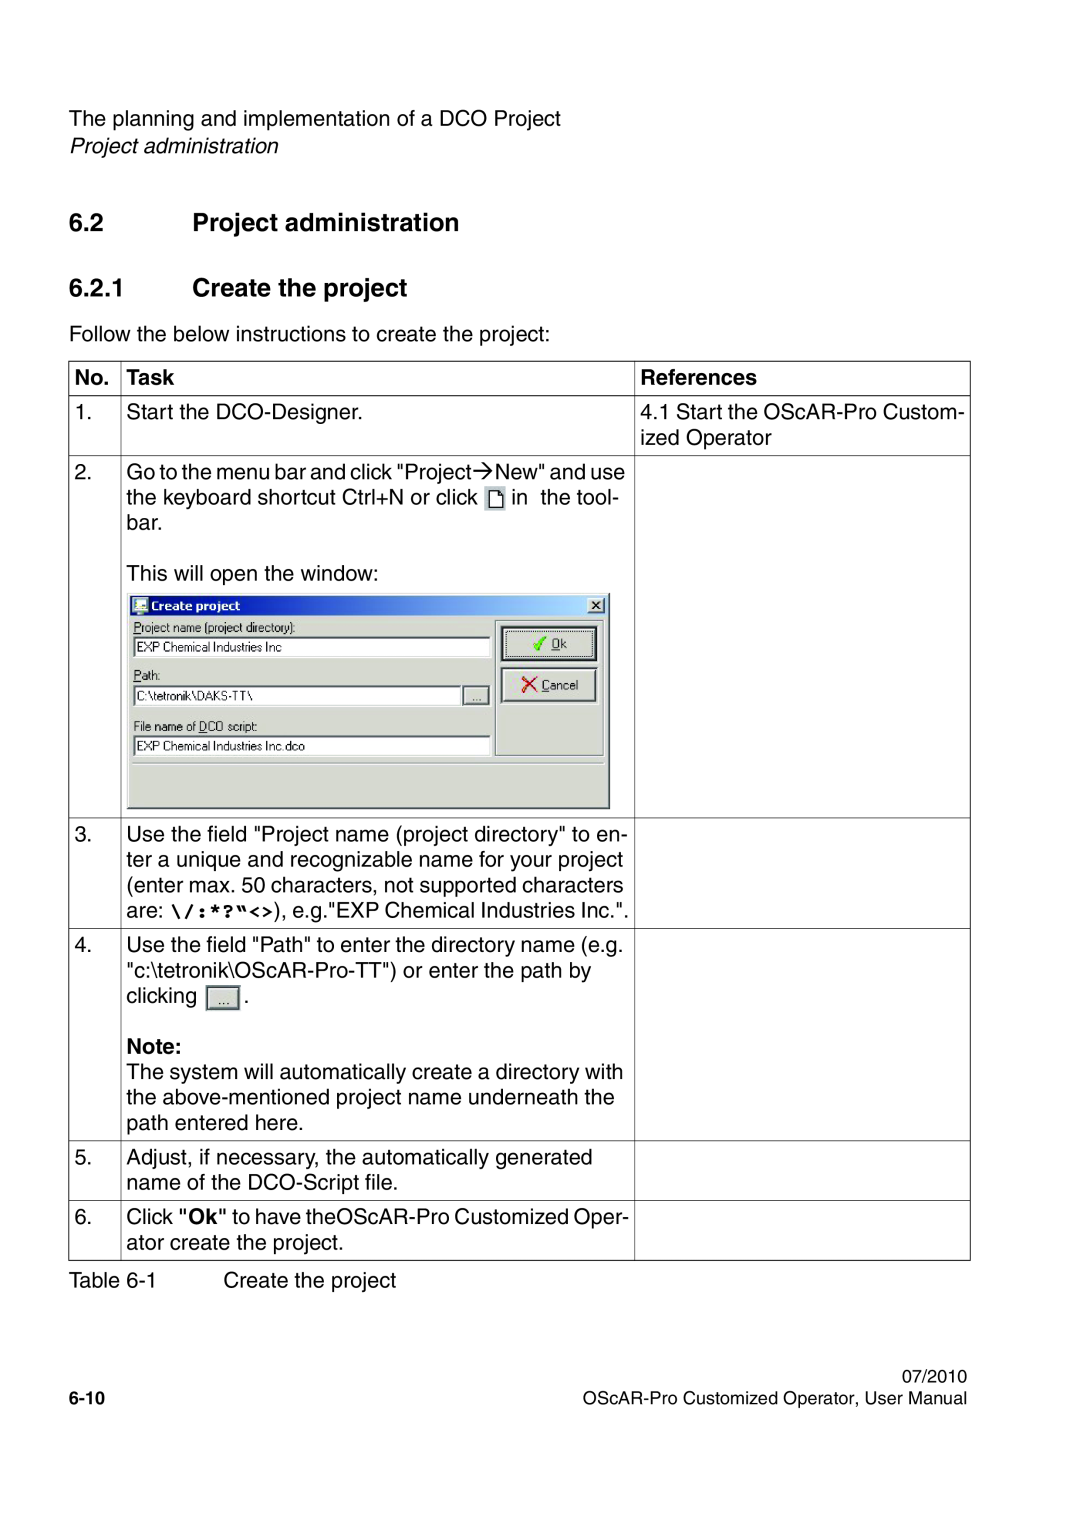 Siemens A31003-51730-U103-7619 user manual 6.2Project administration 6.2.1Create the project, References, Task 